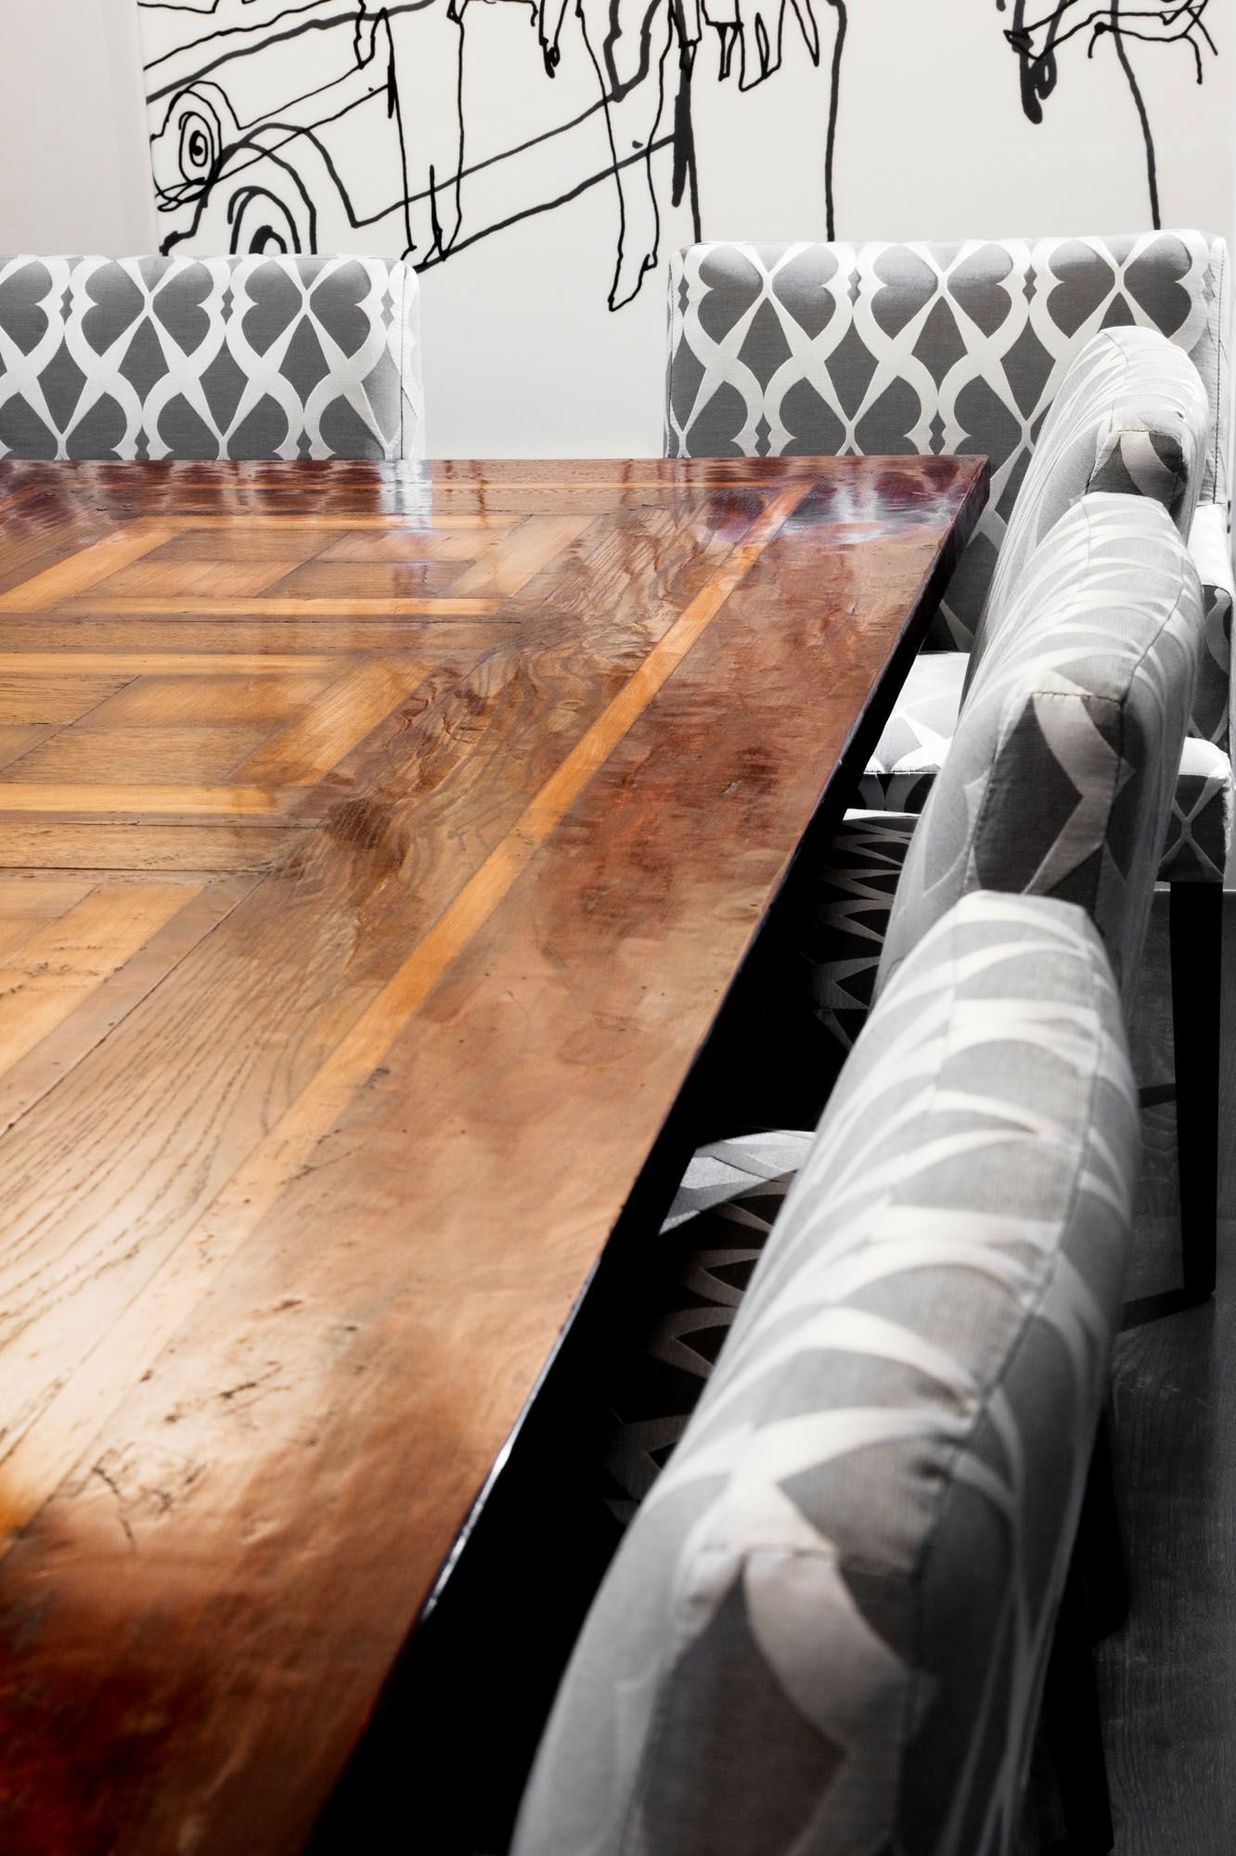 Selecting the right dining table is a key to the longivetey and enjoyment of your dining experience